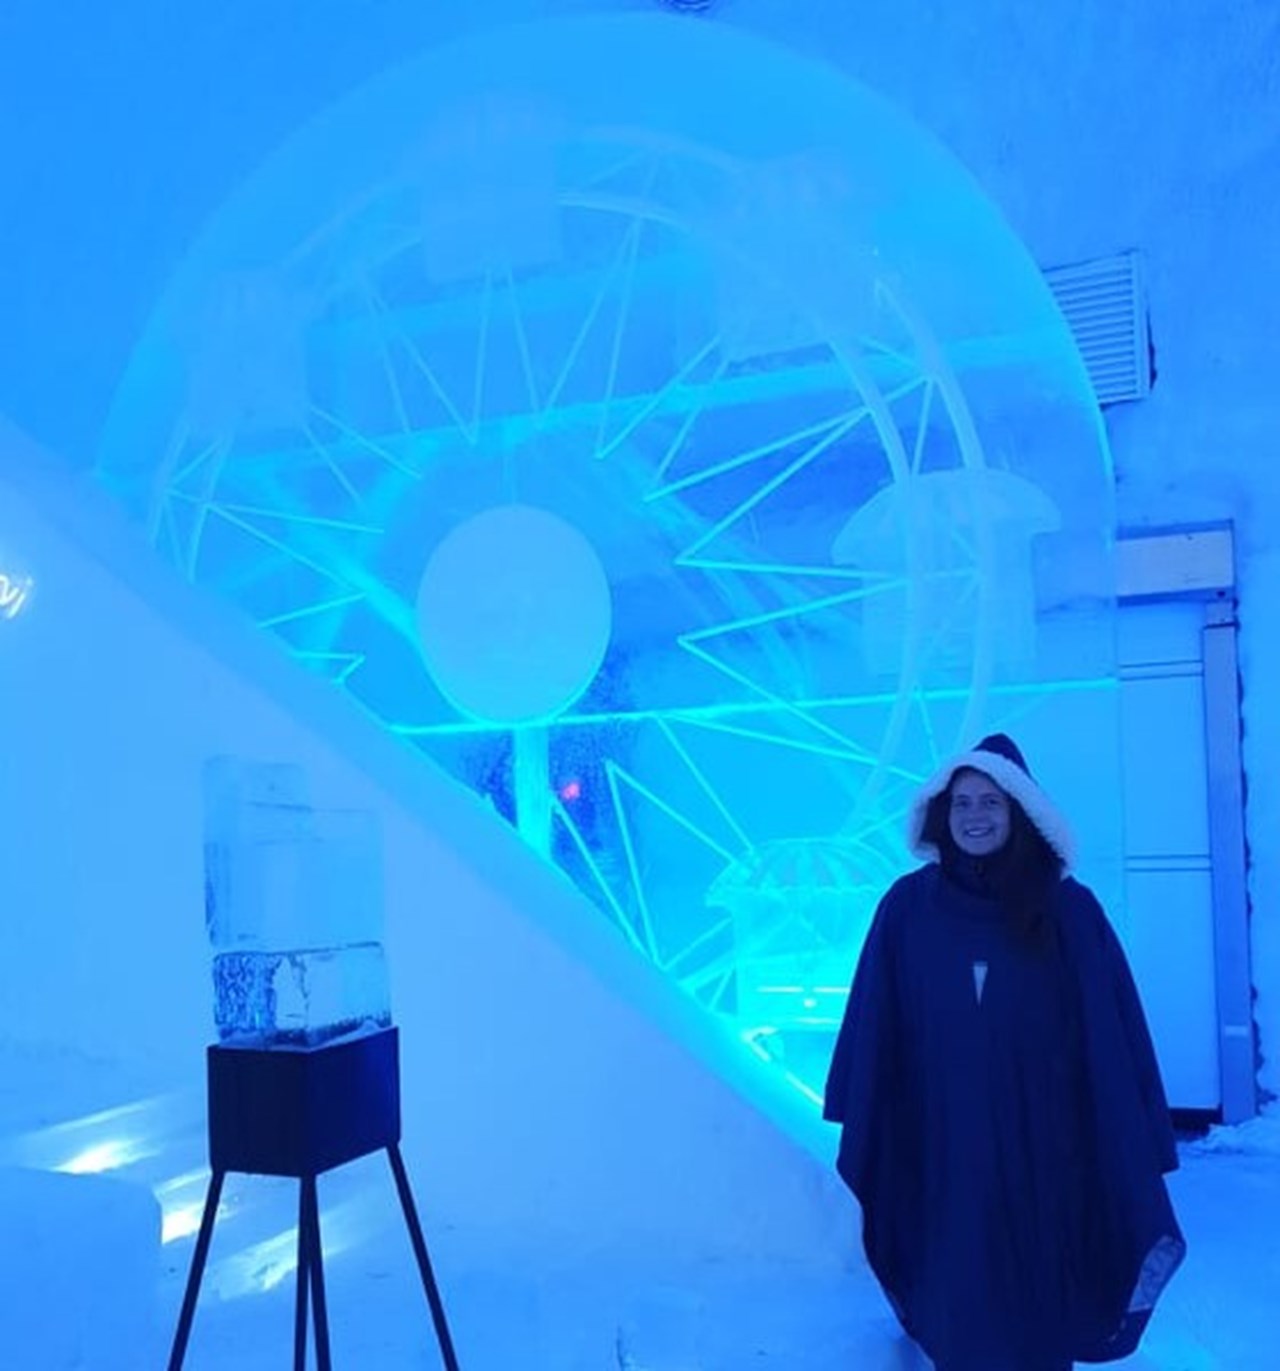 Moa Mattson, PhD student at the Department of Applied Physics and Electronics, Umeå University, is wearing a long dark poncho with a fur collar at an ice formation 'Ferris wheel' inside the ice hotel in Jukkasjärvi.